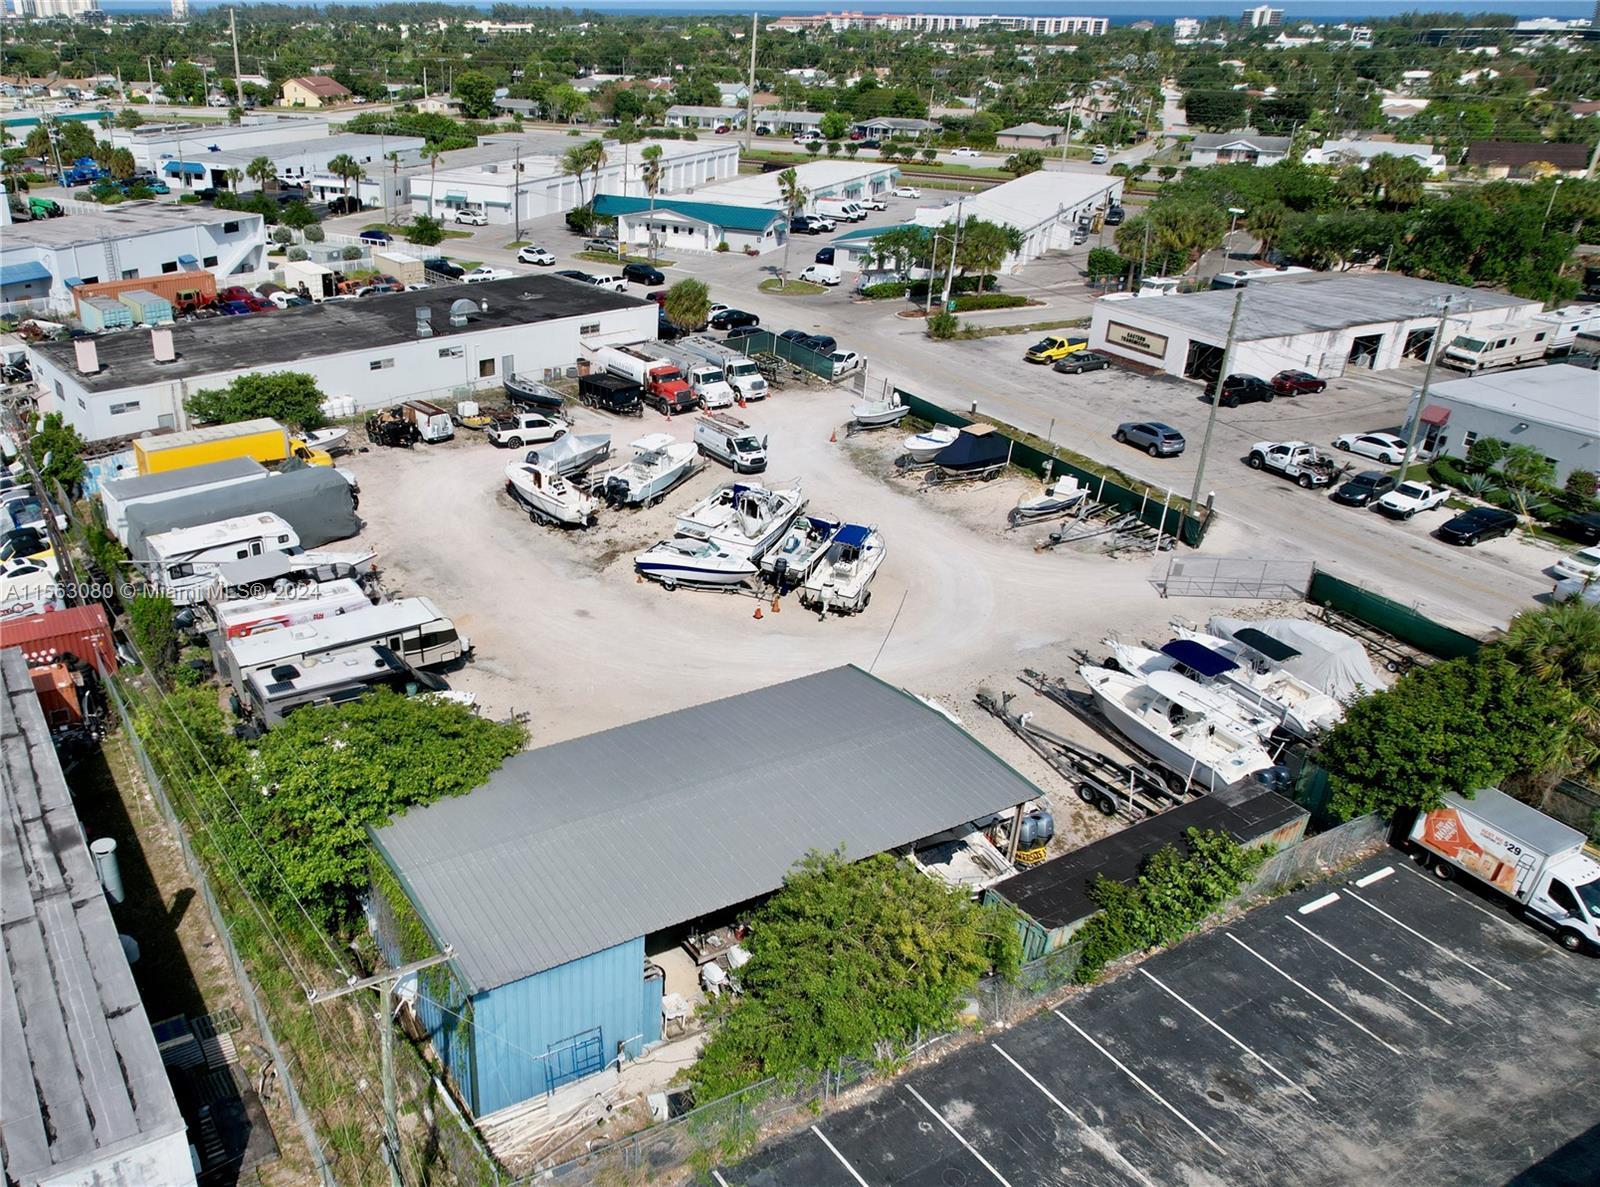 Prime commercial property in Boca Raton, offering a versatile high-end boat and truck storage facili